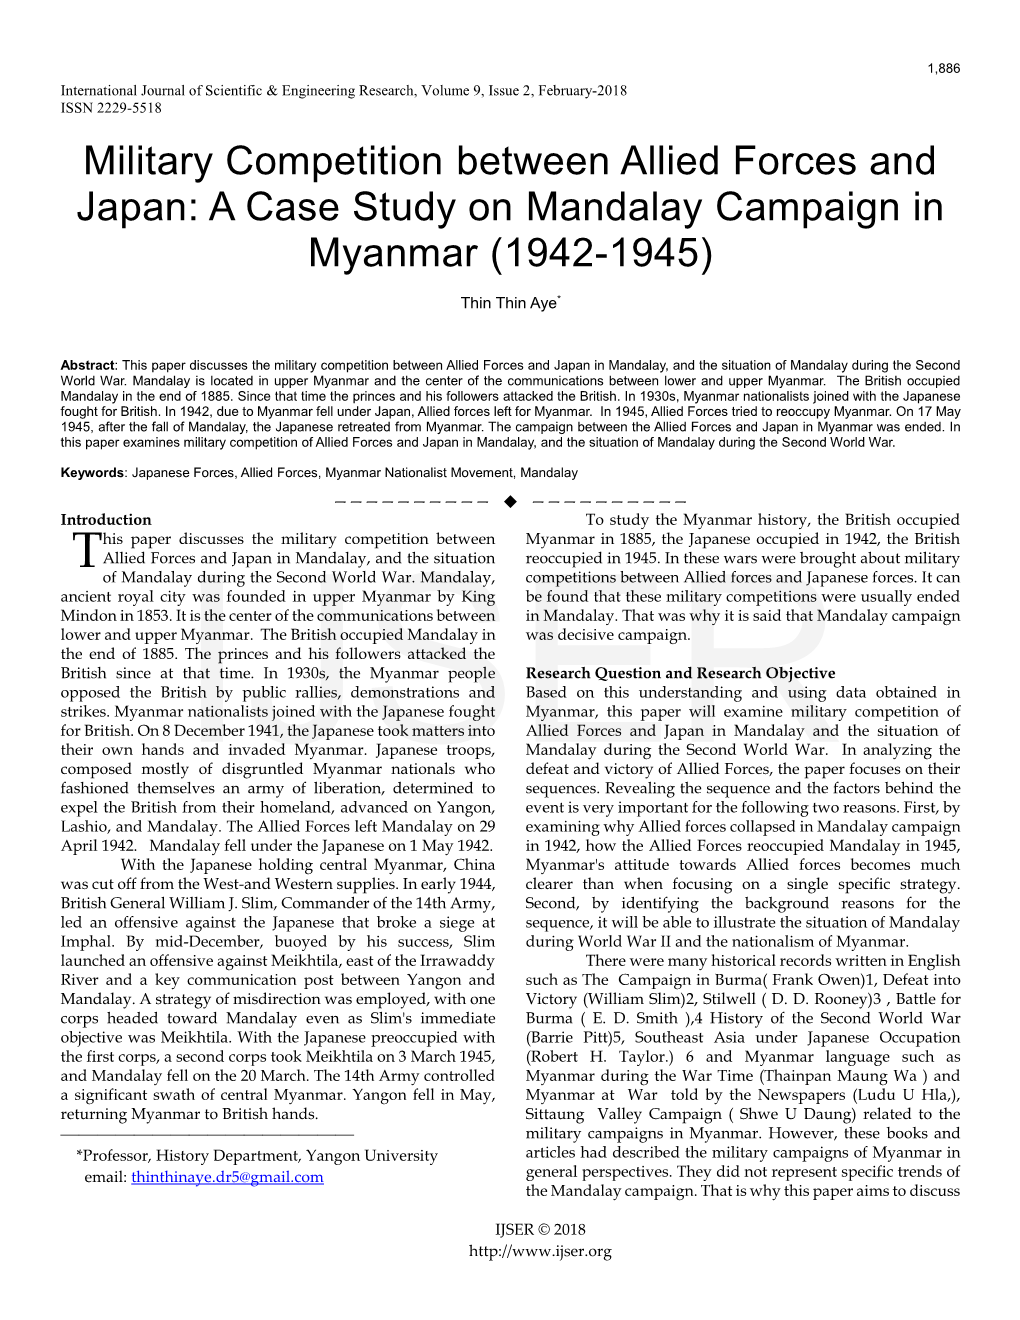 Military Competition Between Allied Forces and Japan: a Case Study on Mandalay Campaign in Myanmar (1942-1945)